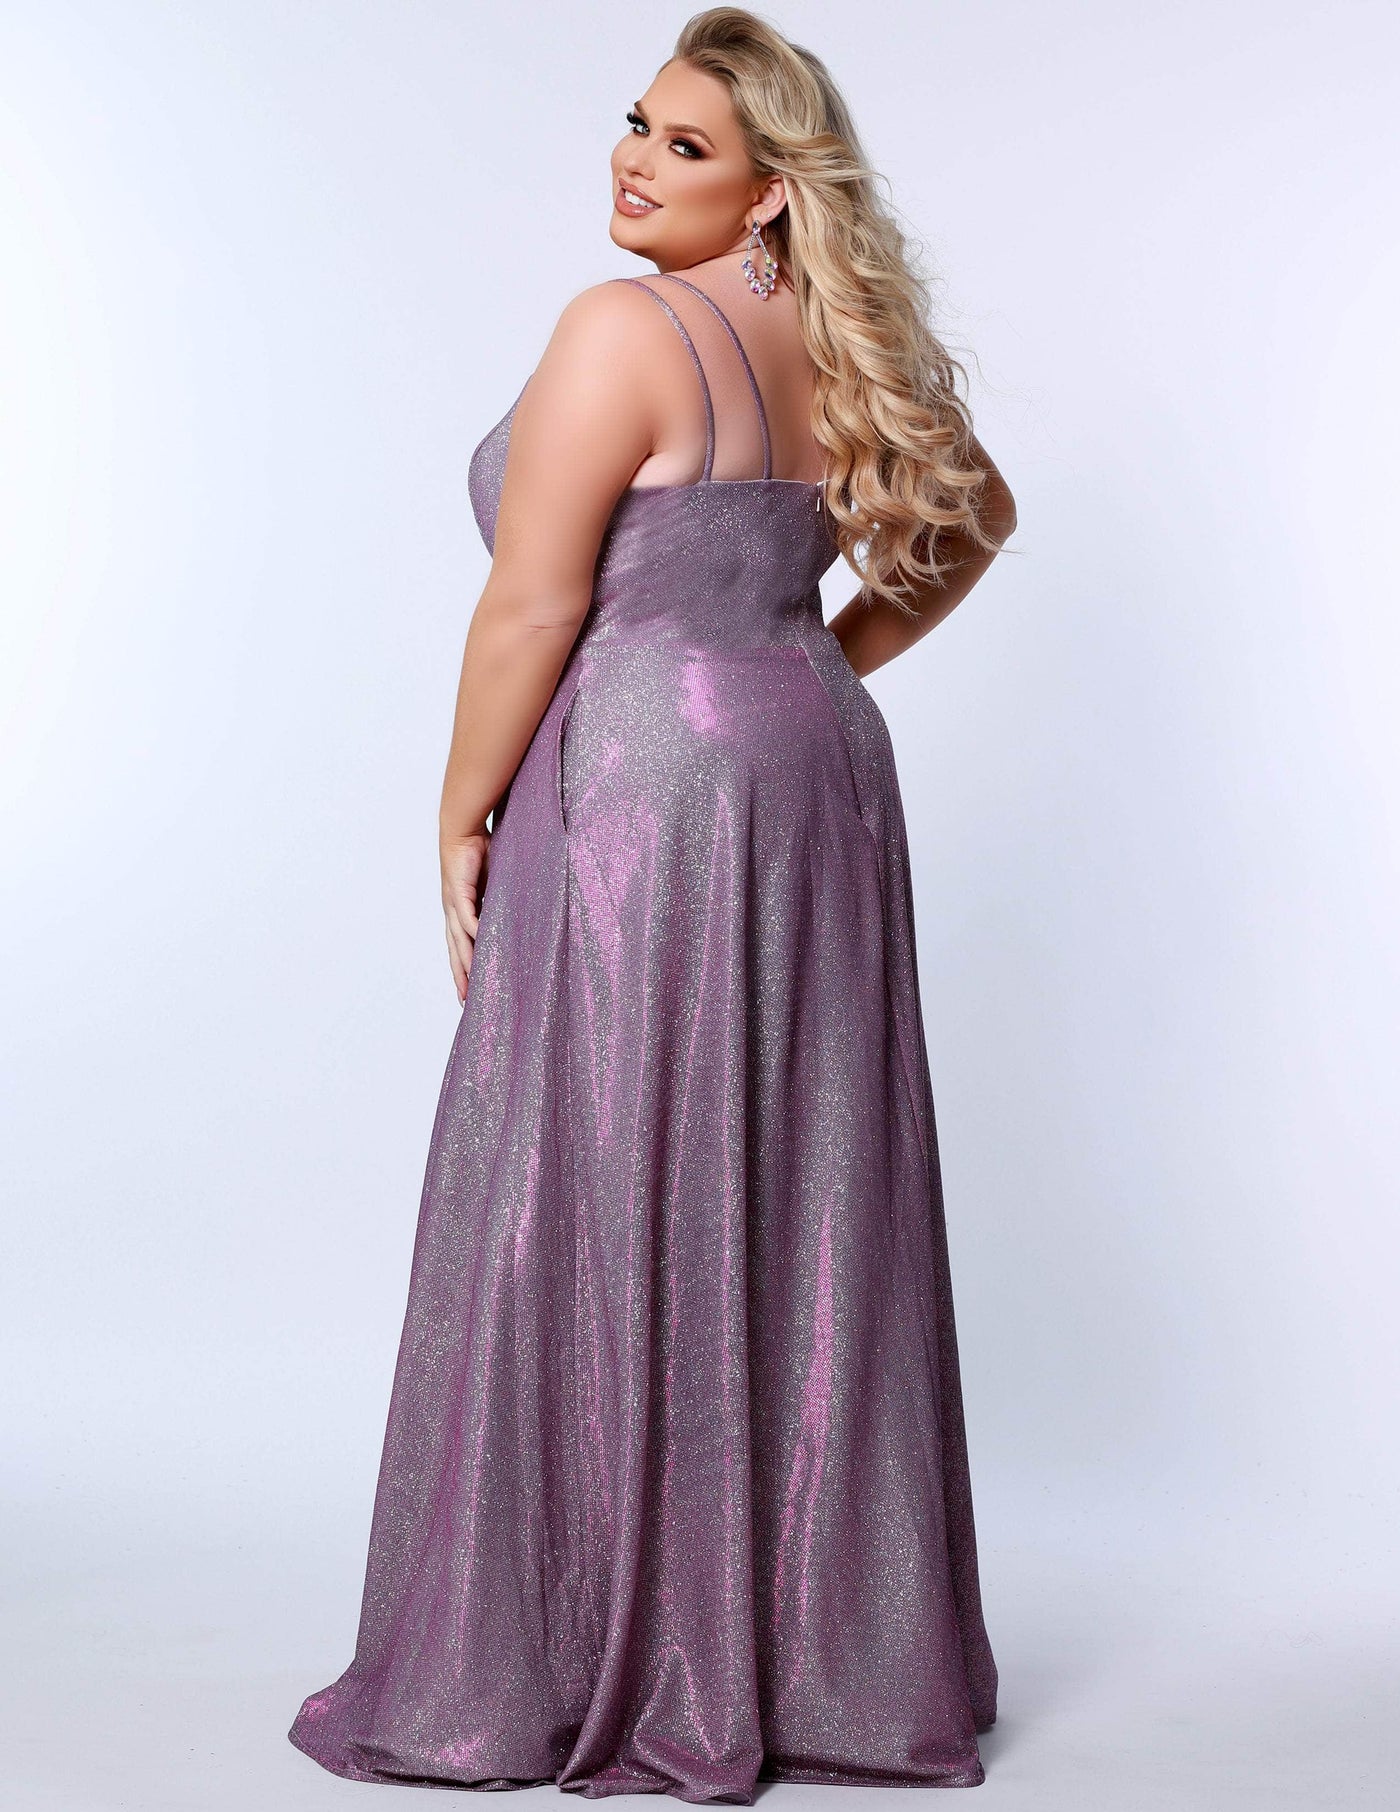 Sydney's Closet SC7349 - Scoop Neck Shimmer Prom Gown Special Occasion Dress